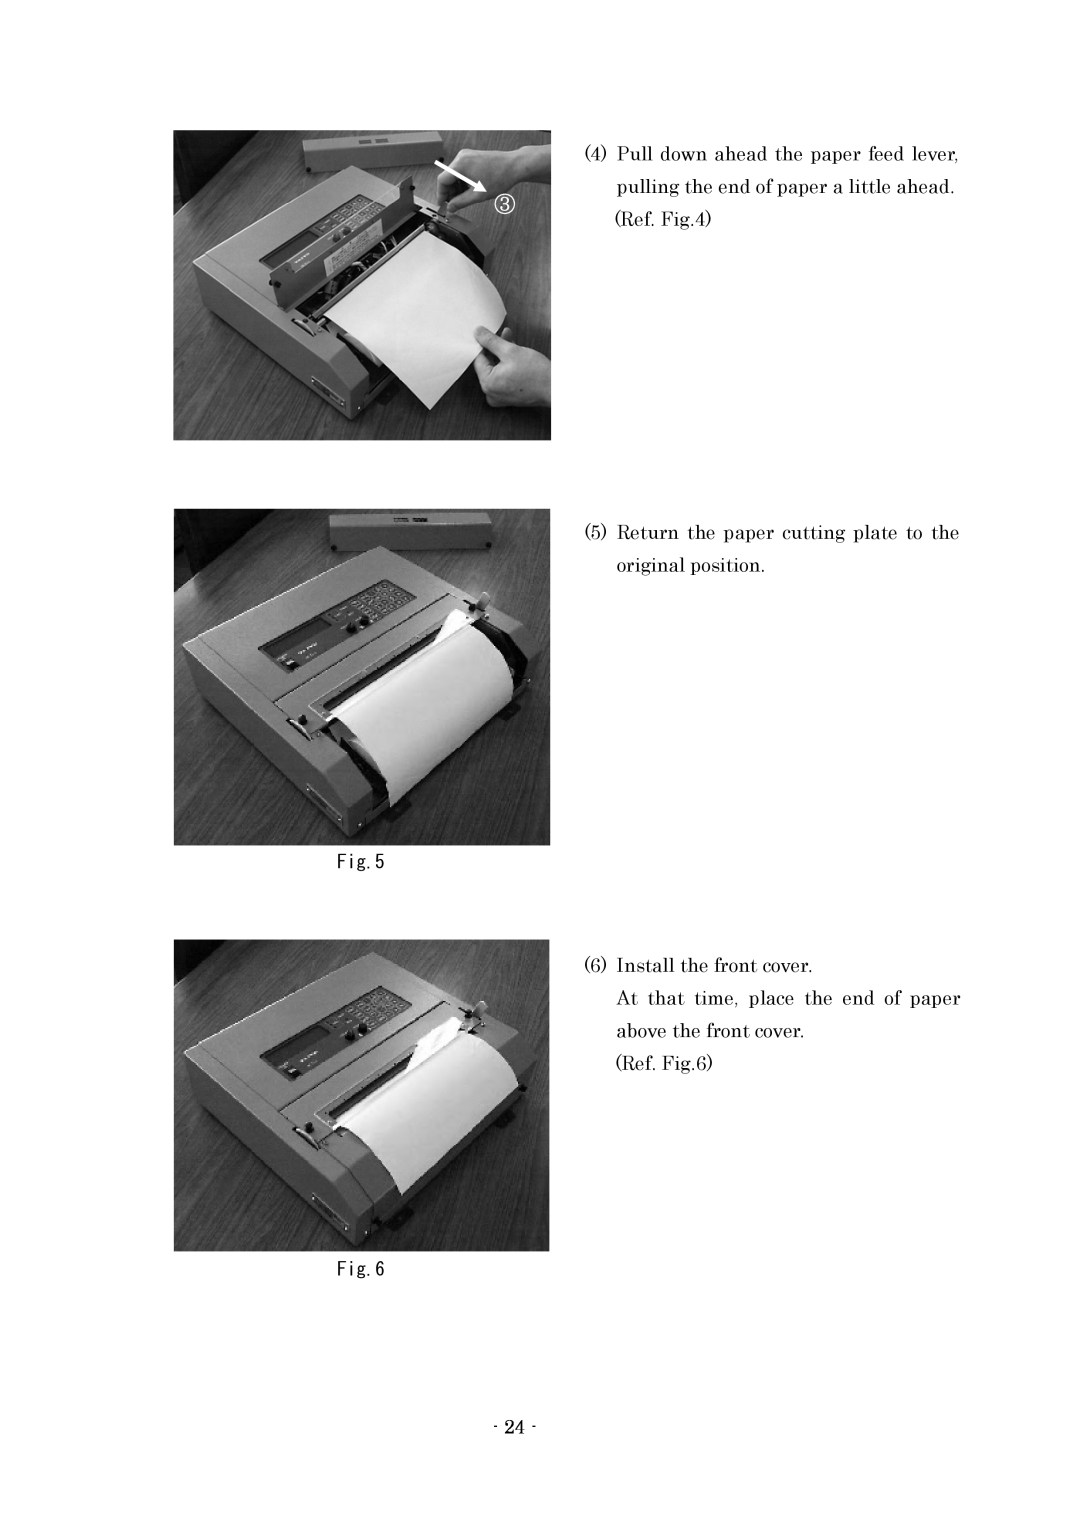 Furuno FAX-410 manual Return the paper cutting plate to the original position, Install the front cover 